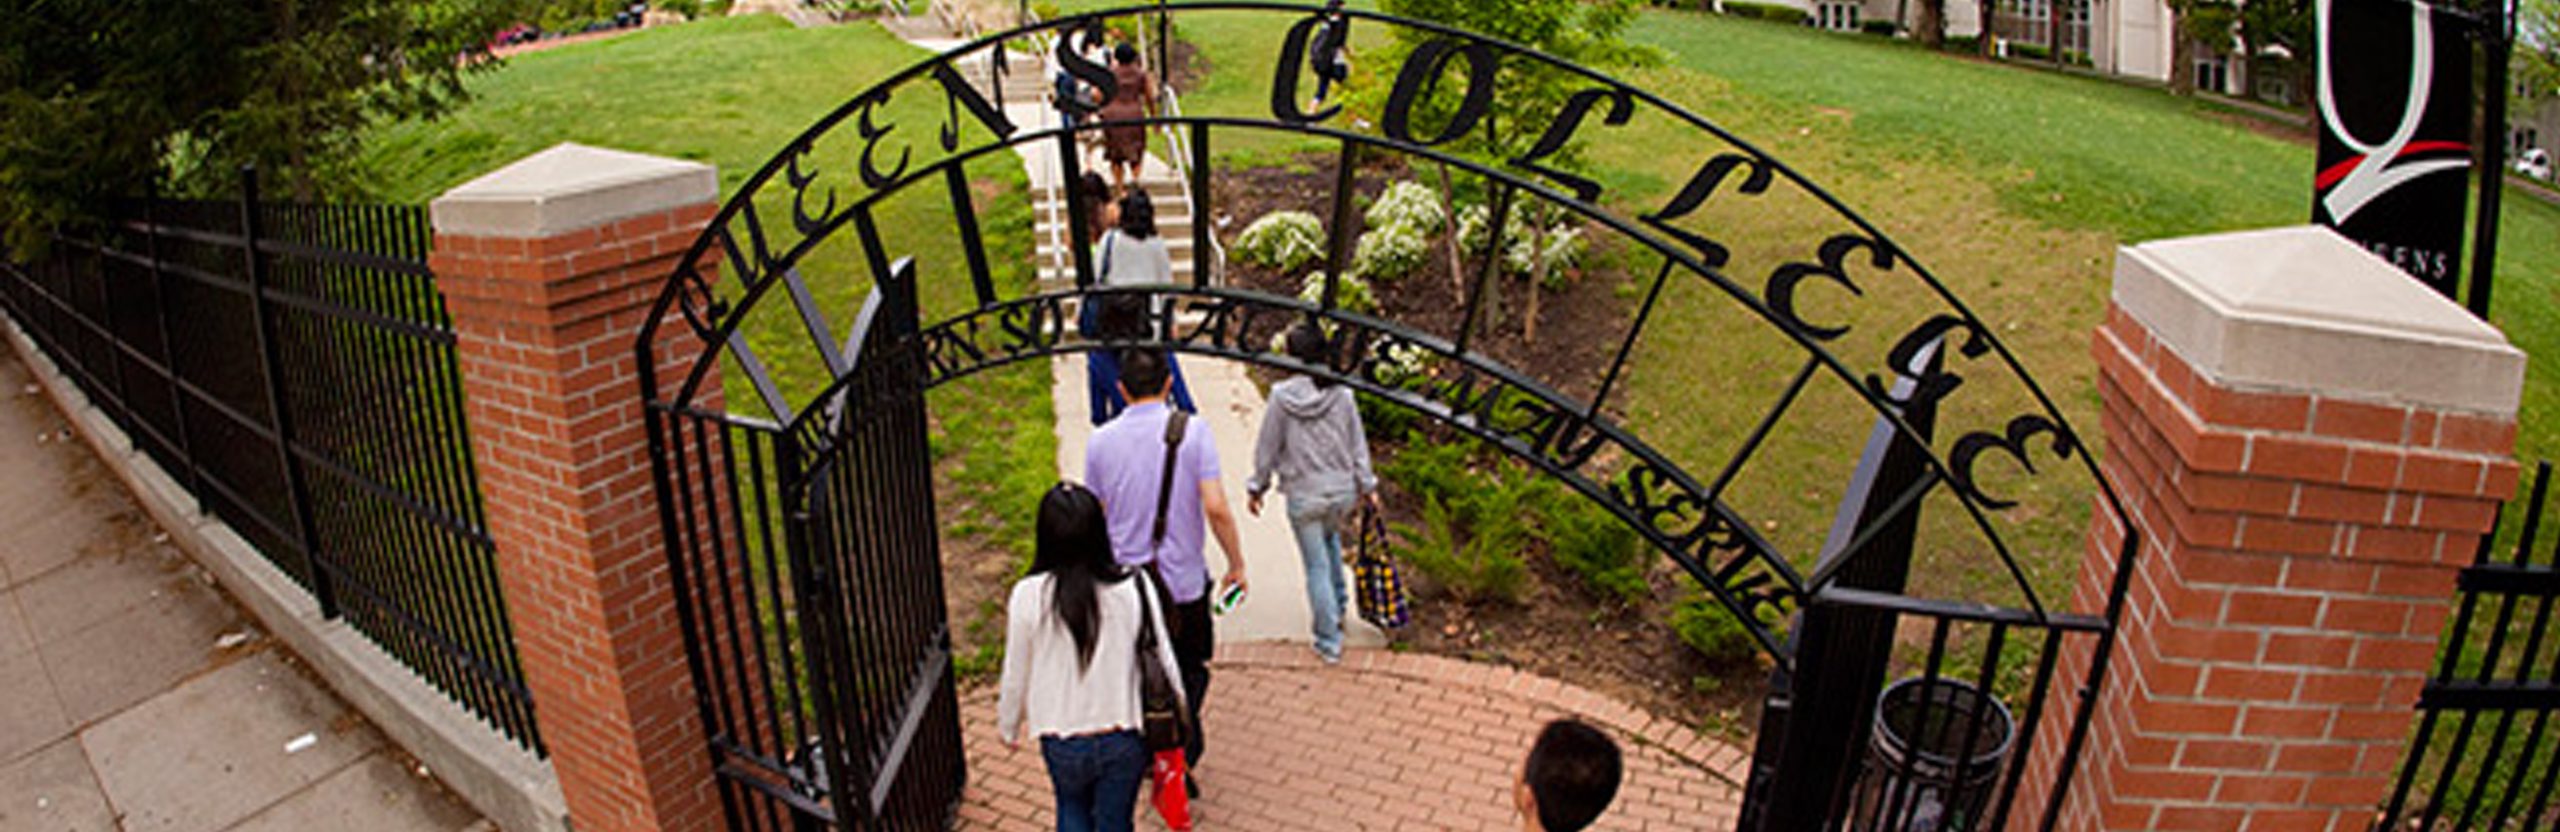 People walking into Queens College through the main gate.